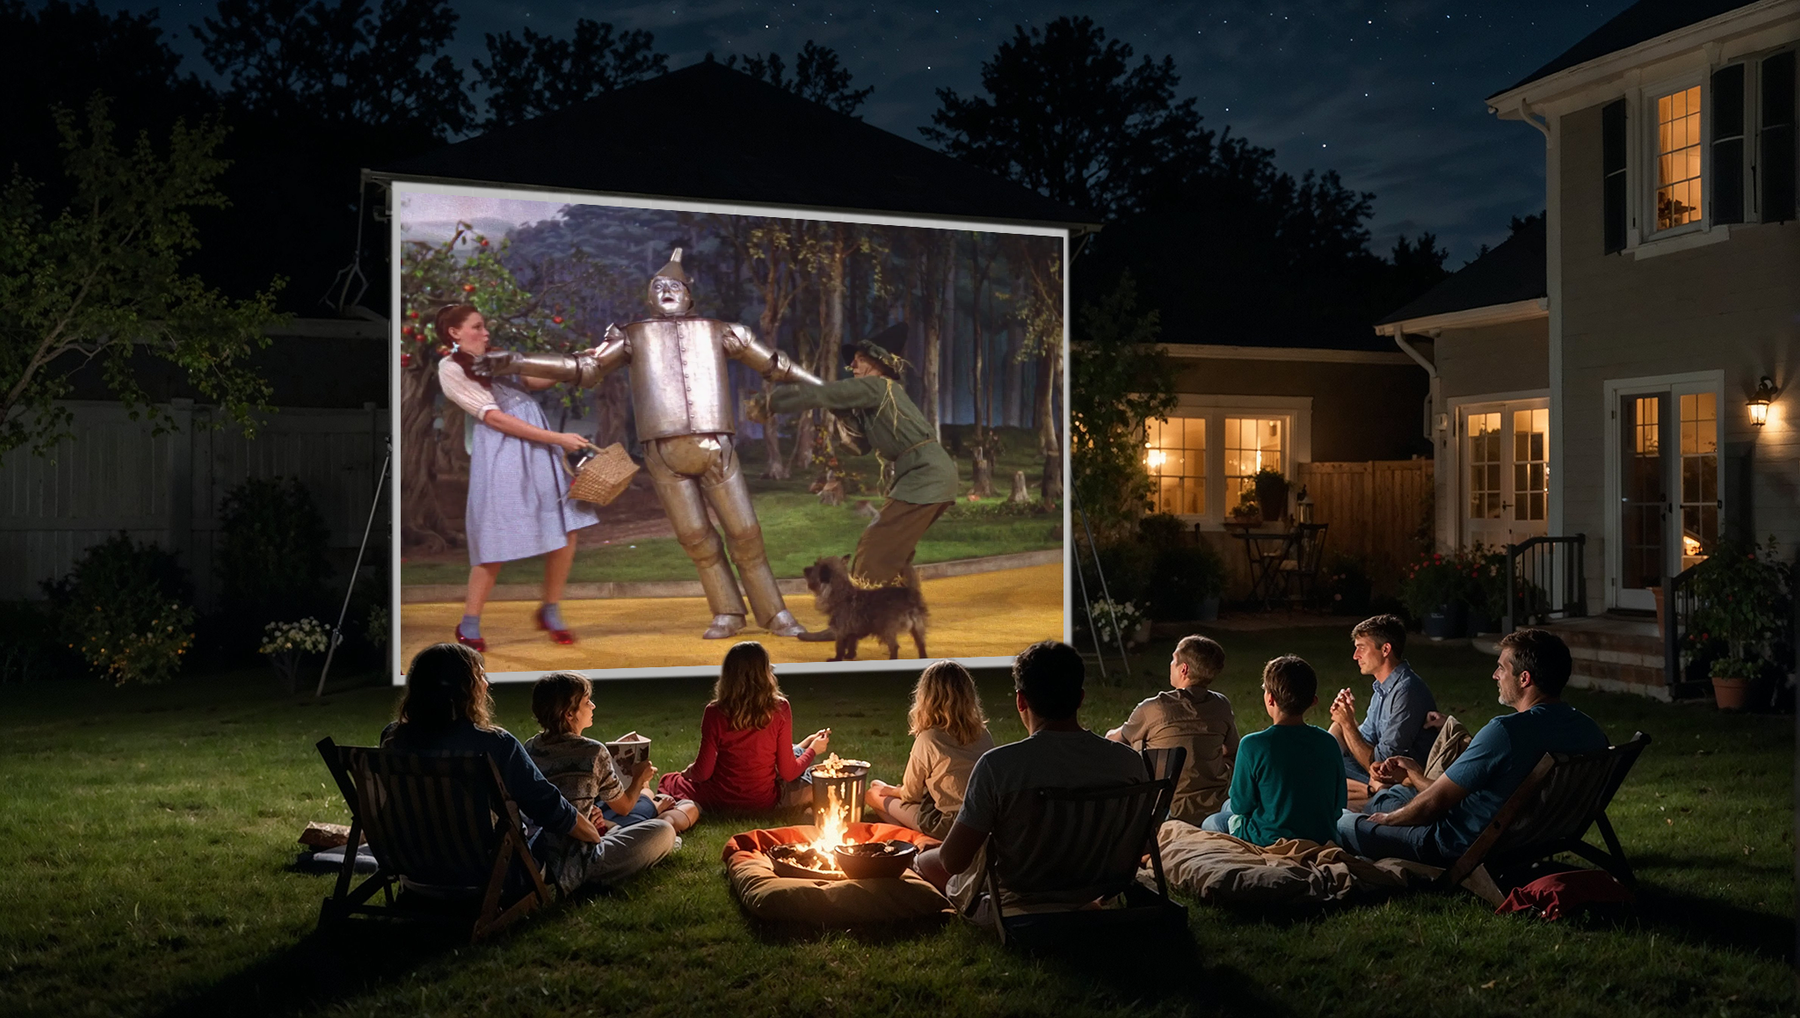 Outdoor Movie Night - Brought to you by Tarps.com